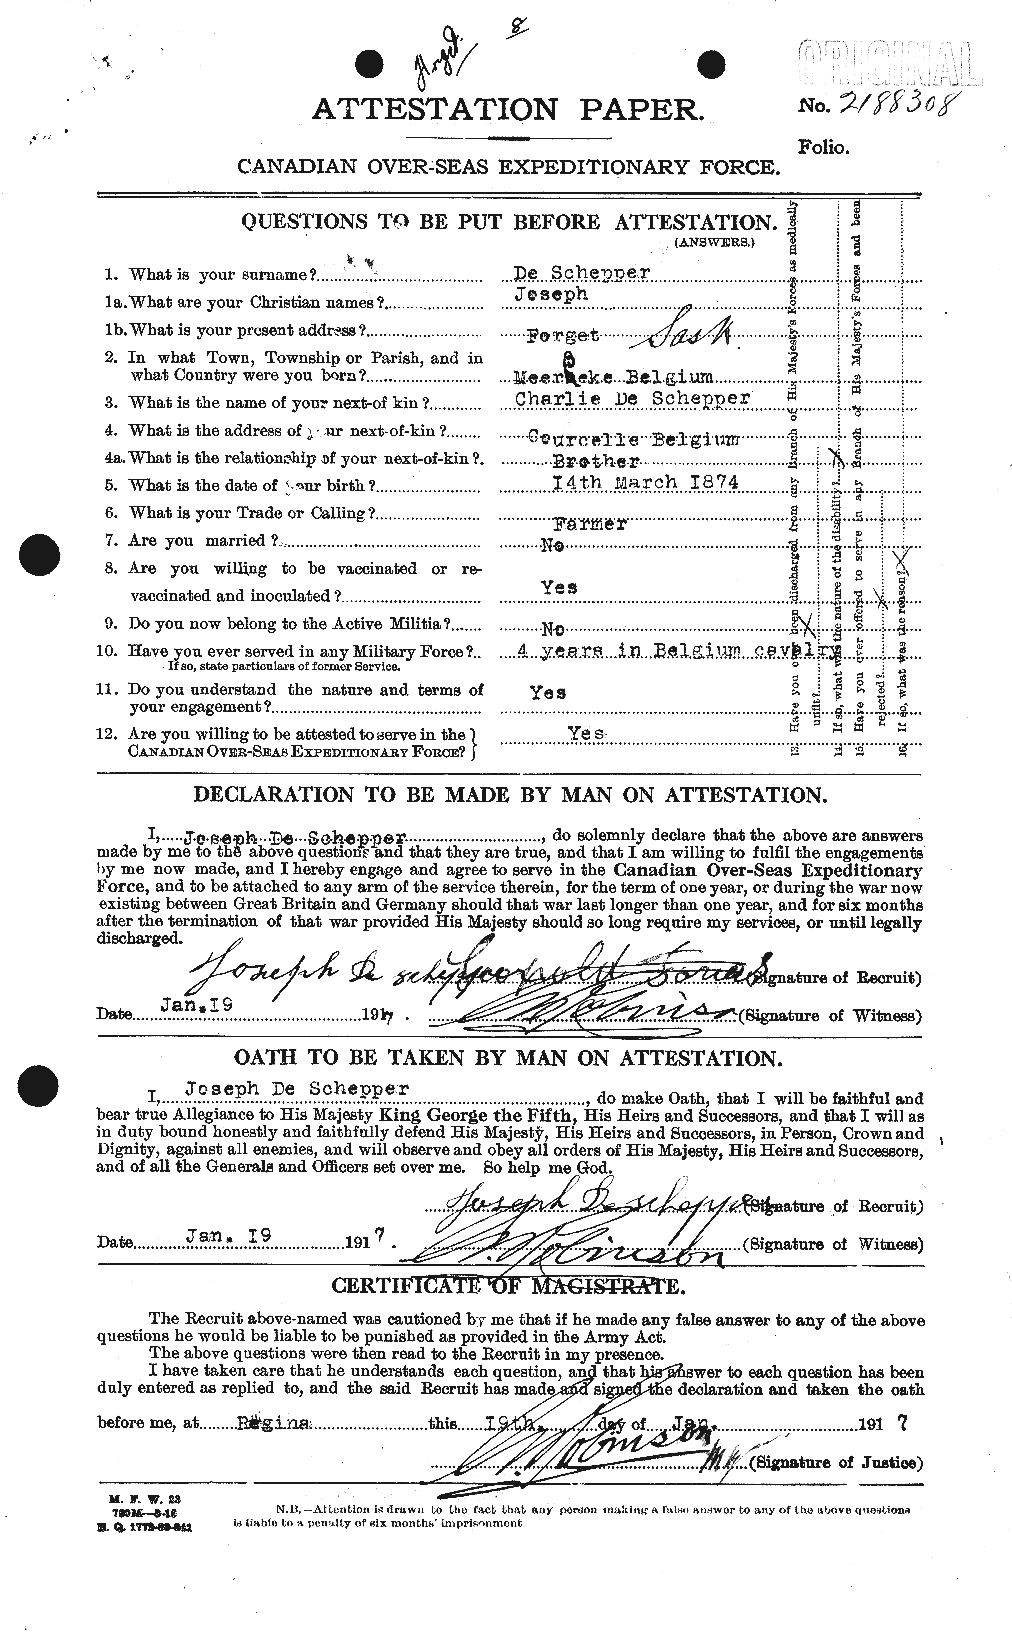 Personnel Records of the First World War - CEF 290247a